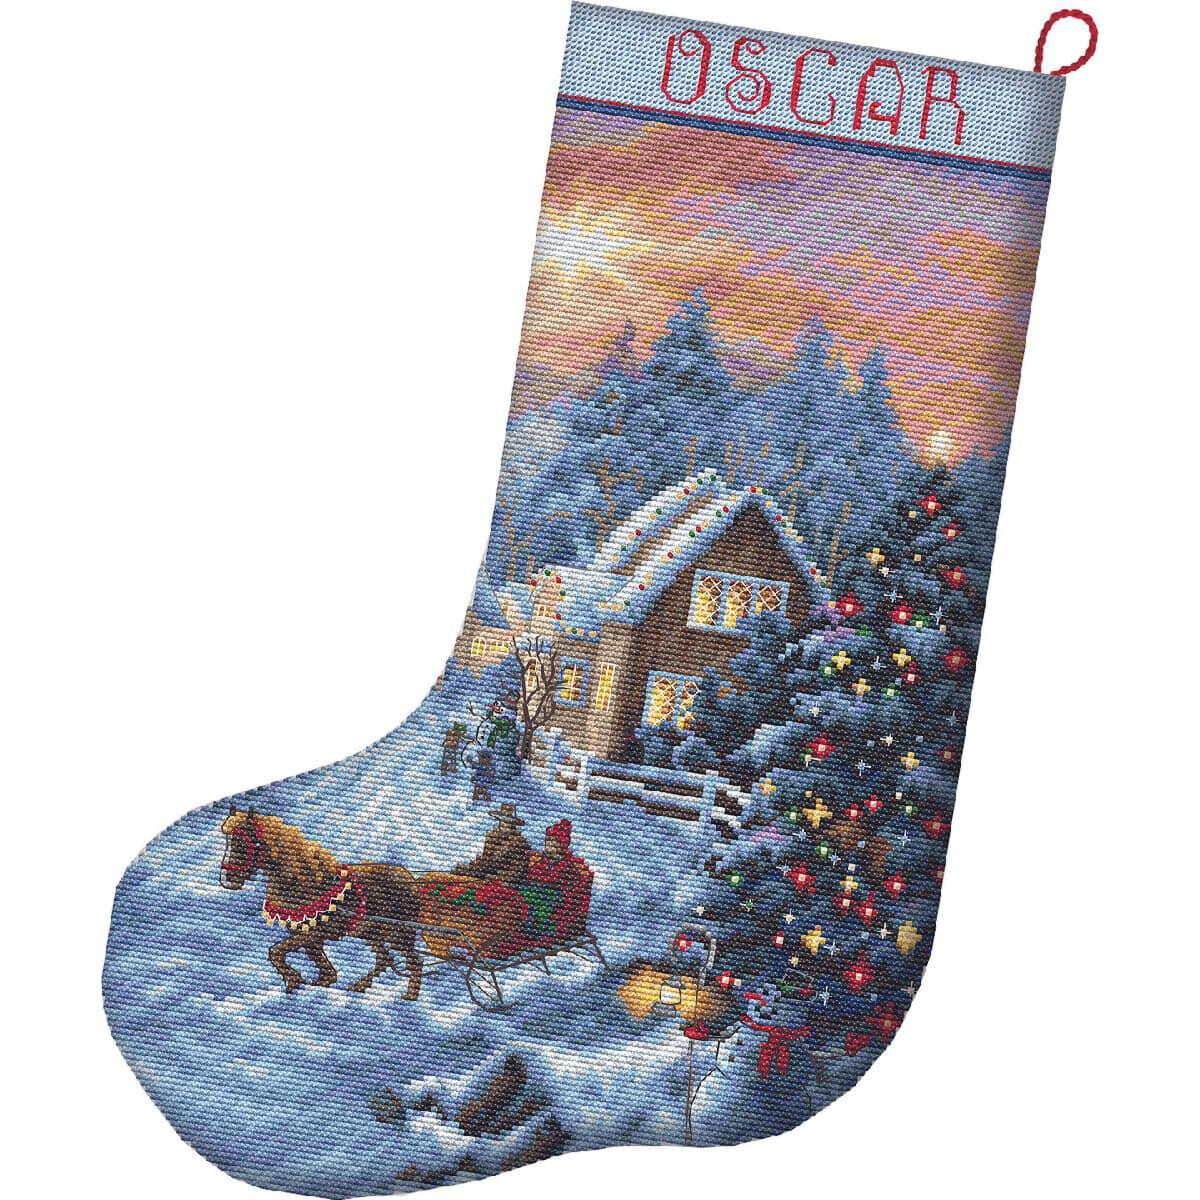 Letistitch counted cross stitch kit "Christmas Eve...